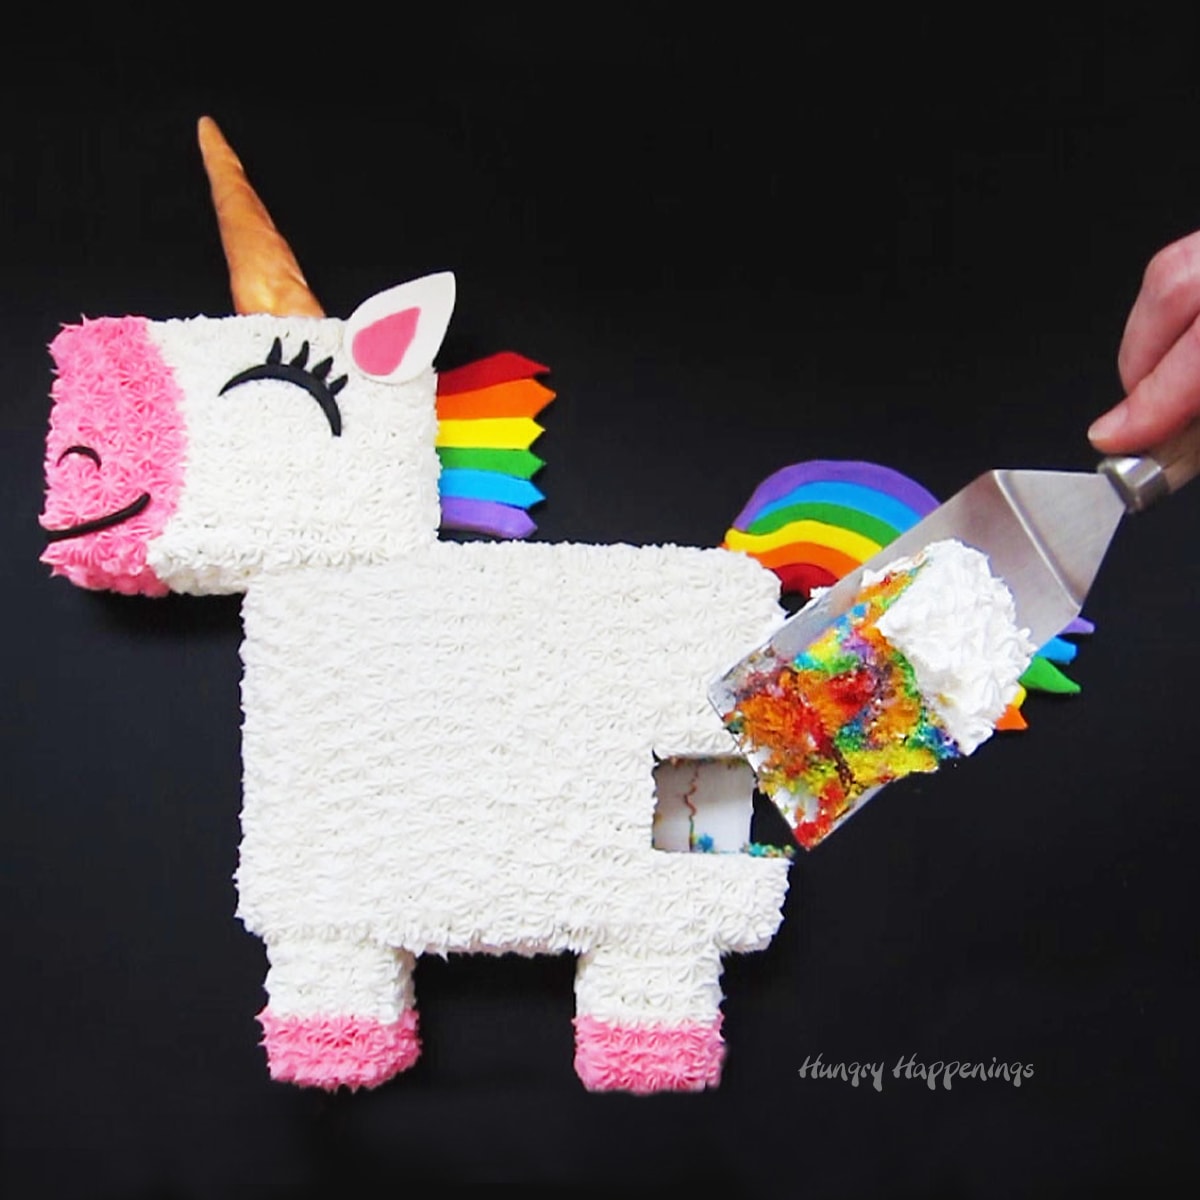 Cute unicorn cake with a piece cut out showing the rainbow cake inside.